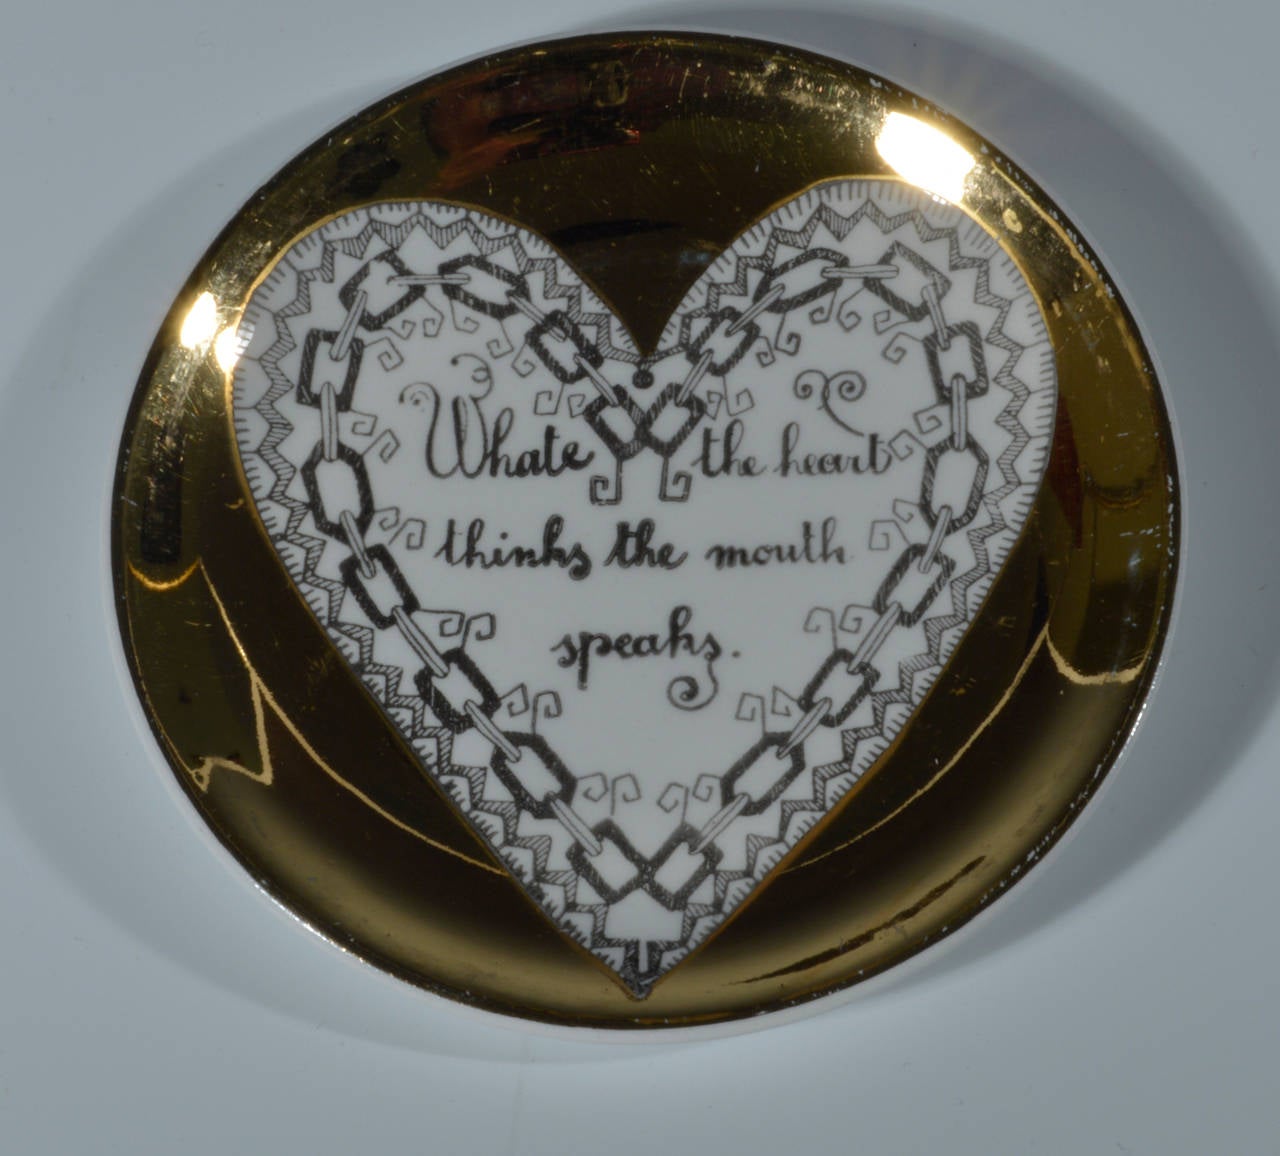 The unusual coasters are in their original red box with a gilt applique heart on the top.  Each coaster has a central white heart on a gold ground.  Within each heart is a saying about love framed by a different heart shaped border

The saying or